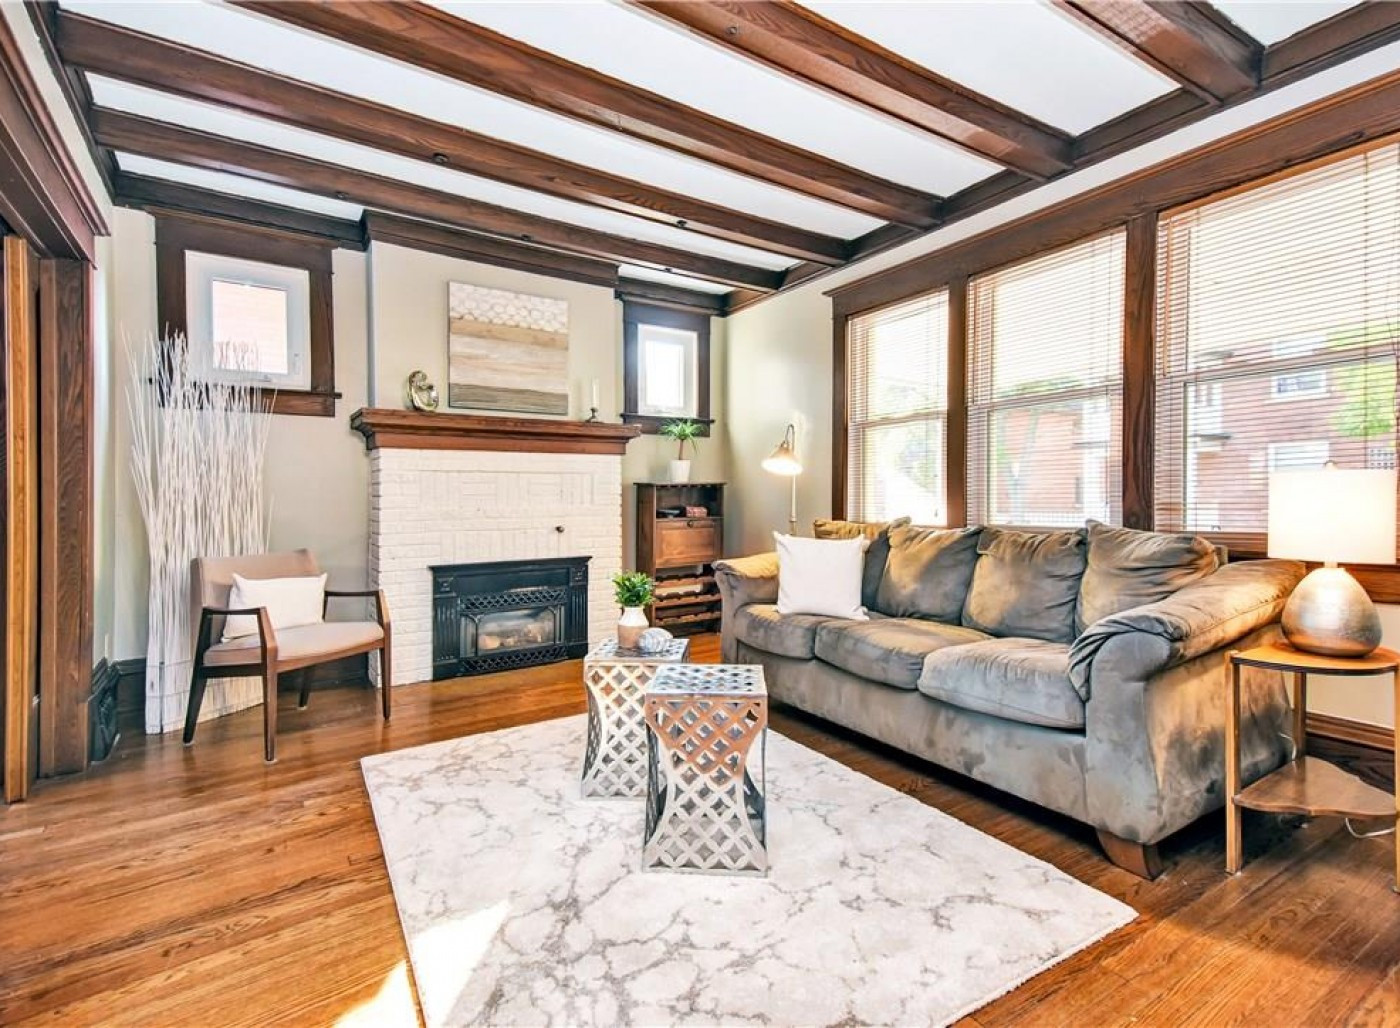 Hardwood Flooring Ottawa Ontario Of 22 Euclid Avenue Faulkner Real Estate Intended for Spacious Tudor Style Home with Charming Veranda On A Popular Street In Old Ottawa south Main Floor Features Kitchen with Lots Of Storage Granite Counters